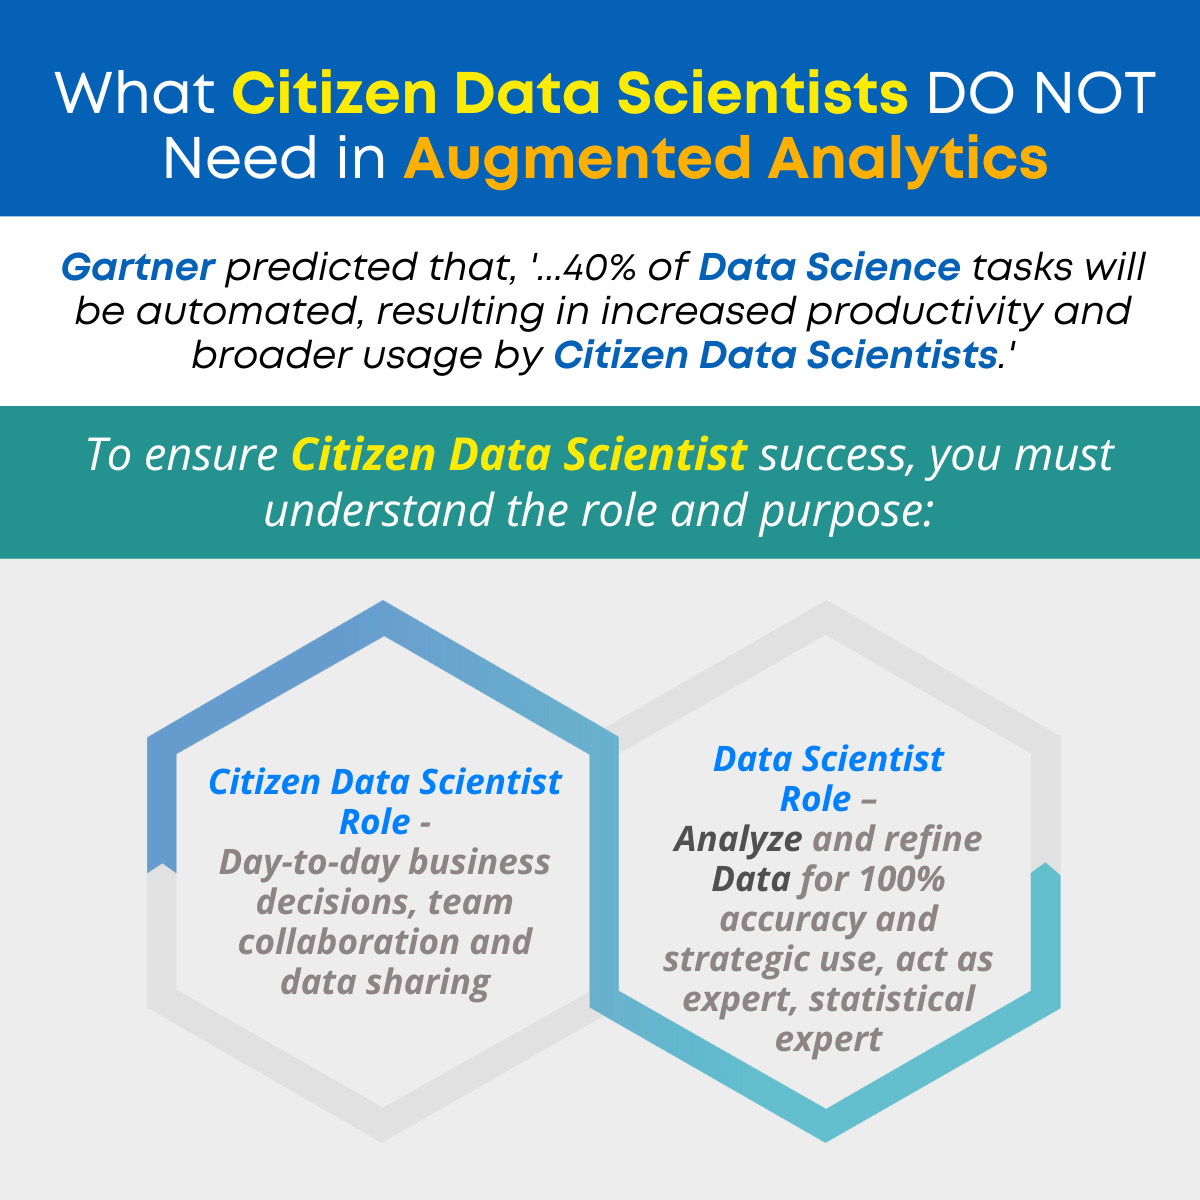 What Citizen Data Scientists DO NOT Need in Augmented Analytics